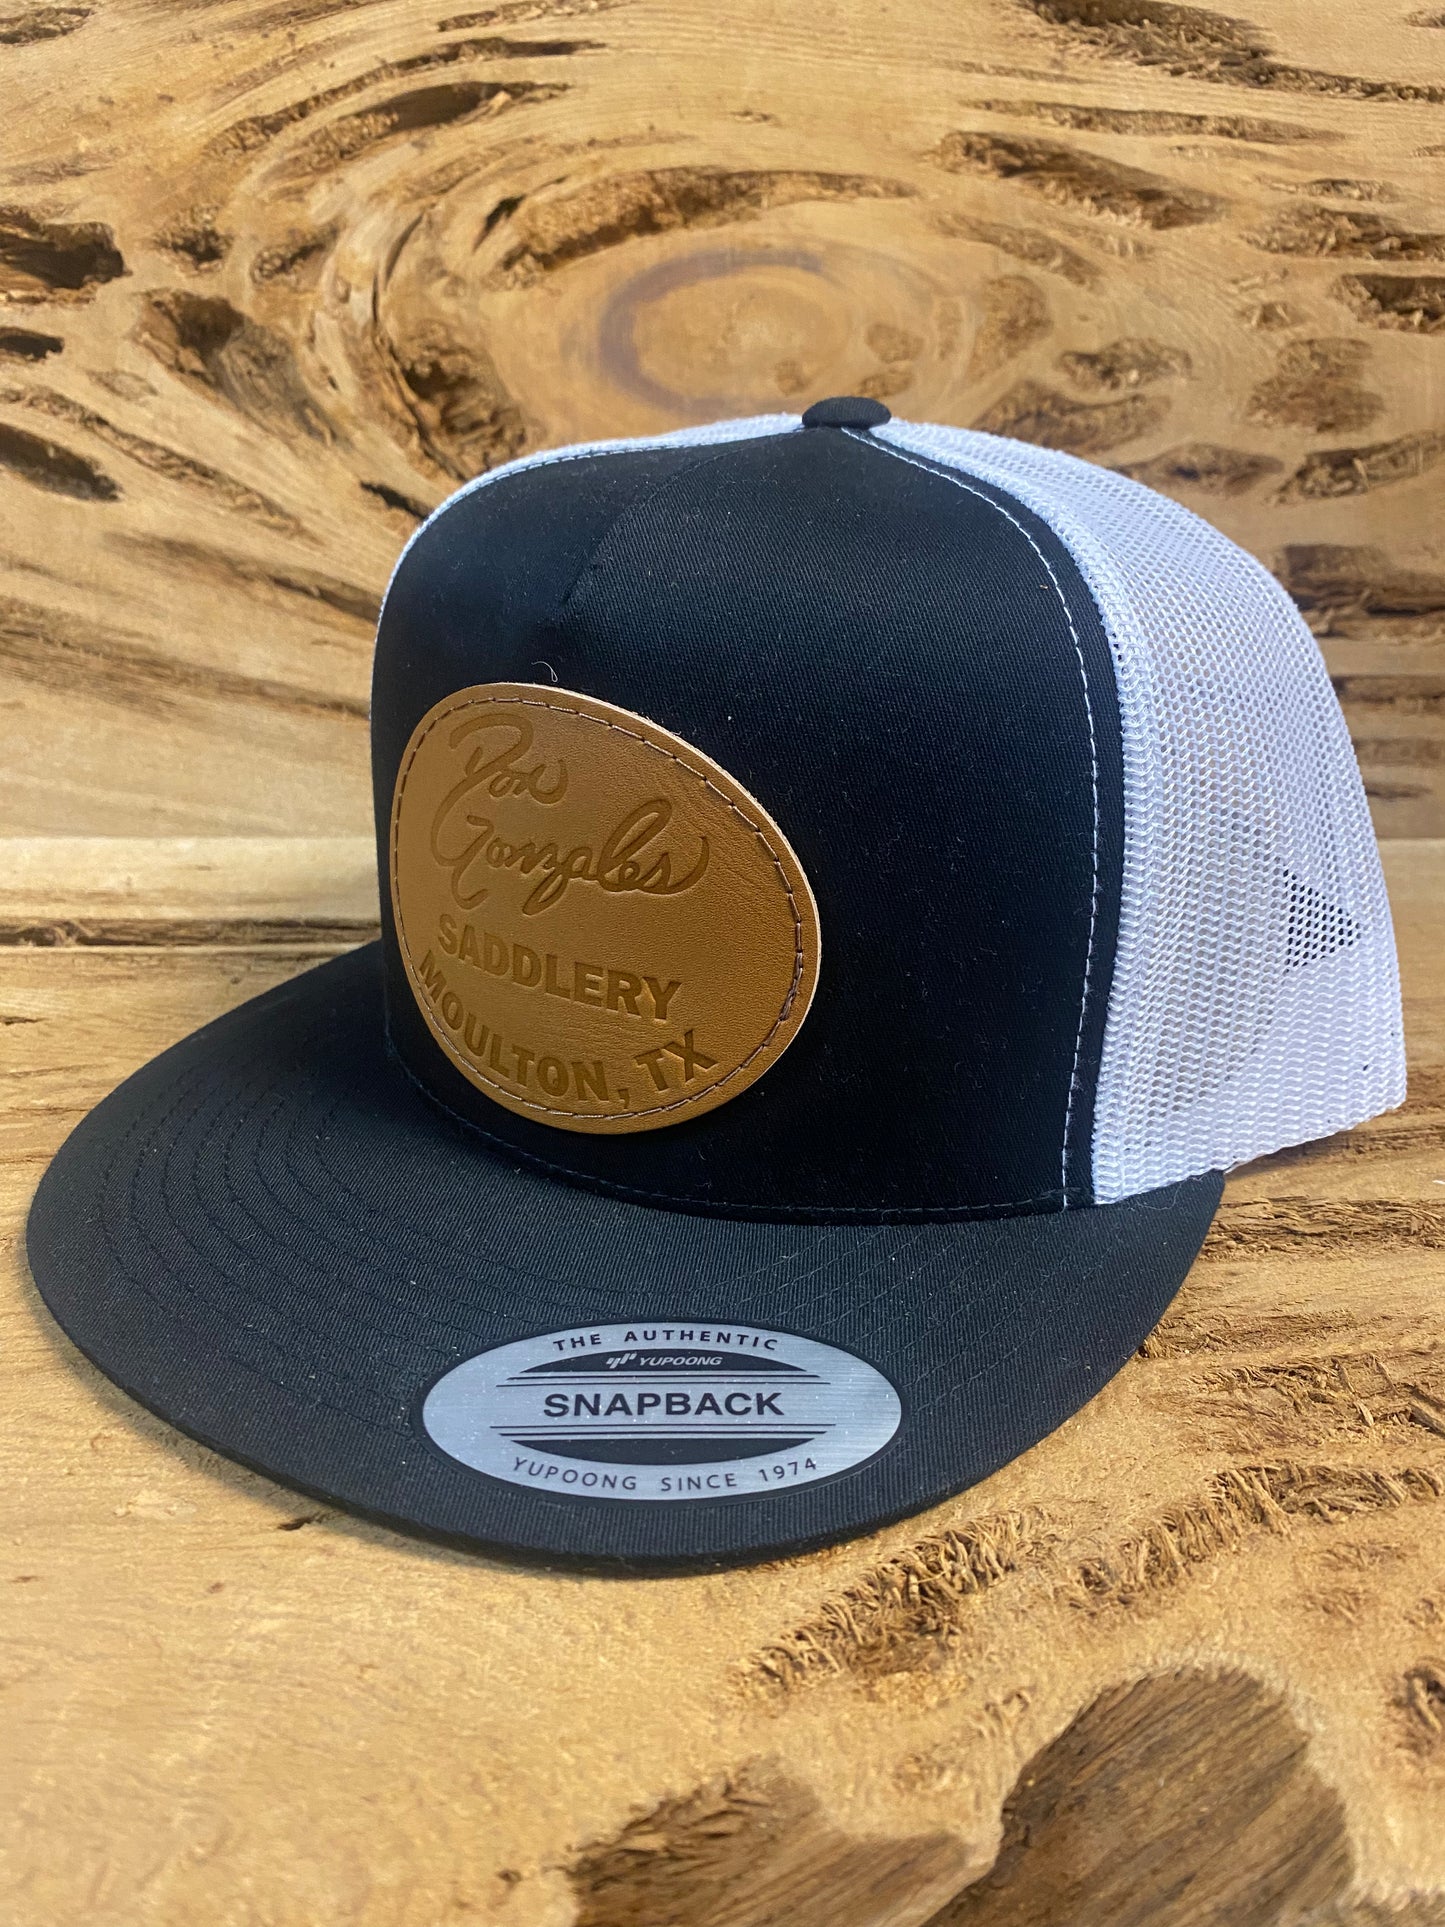 Mesh Snapback Cap with Leather Patch - Black/White